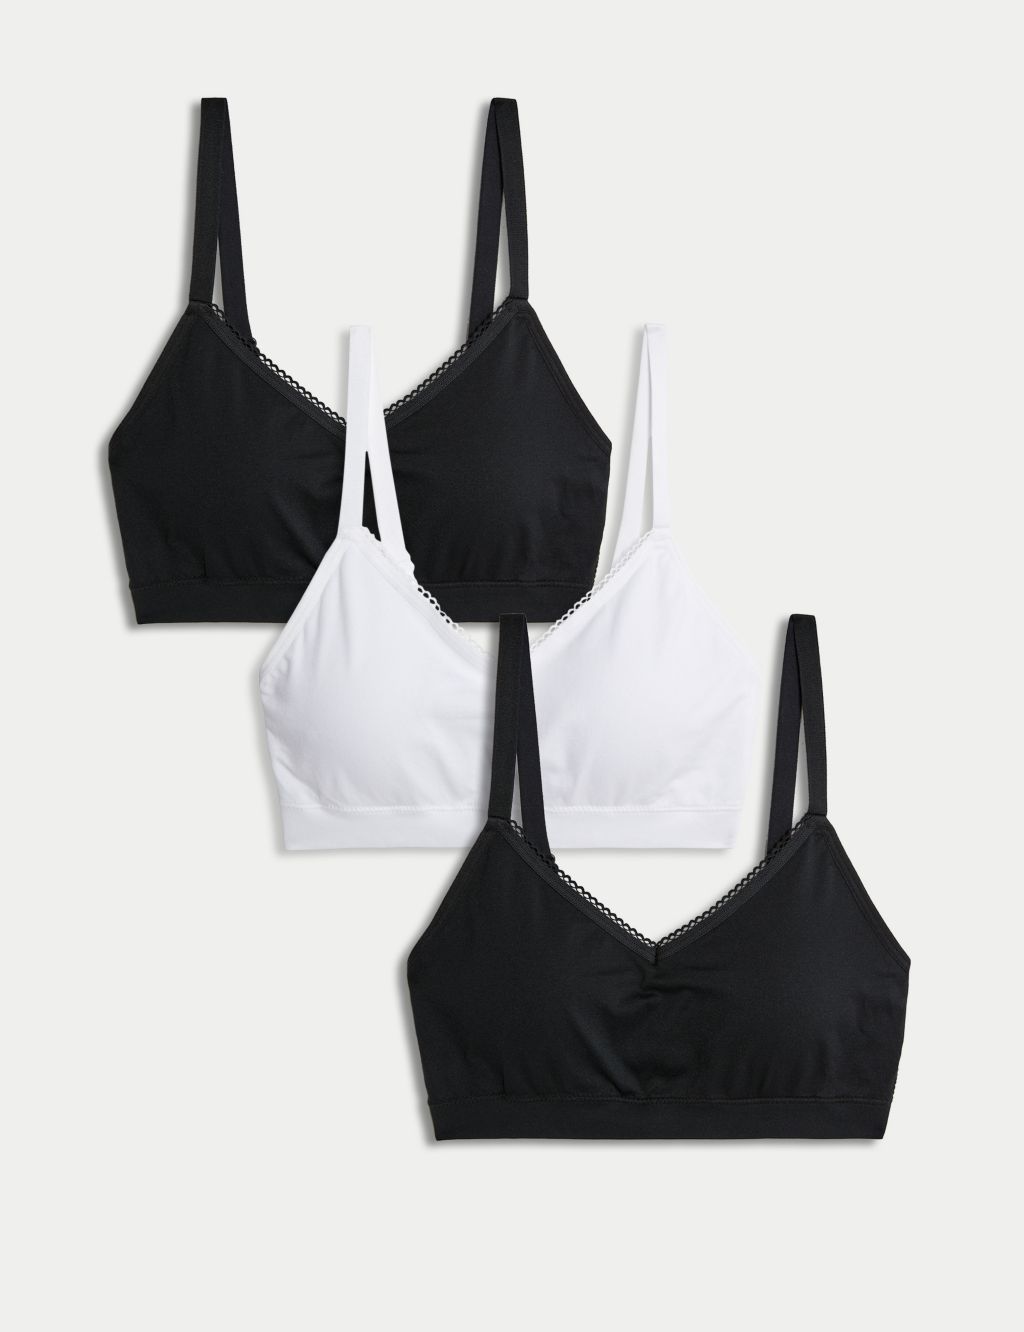 50% off Clear!Sports Bras for Women Casual and Comfortable Sexy Sports Bra  Without Steel Rings Sexy Everyday Bras Vest Lingerie Underwear Gift for